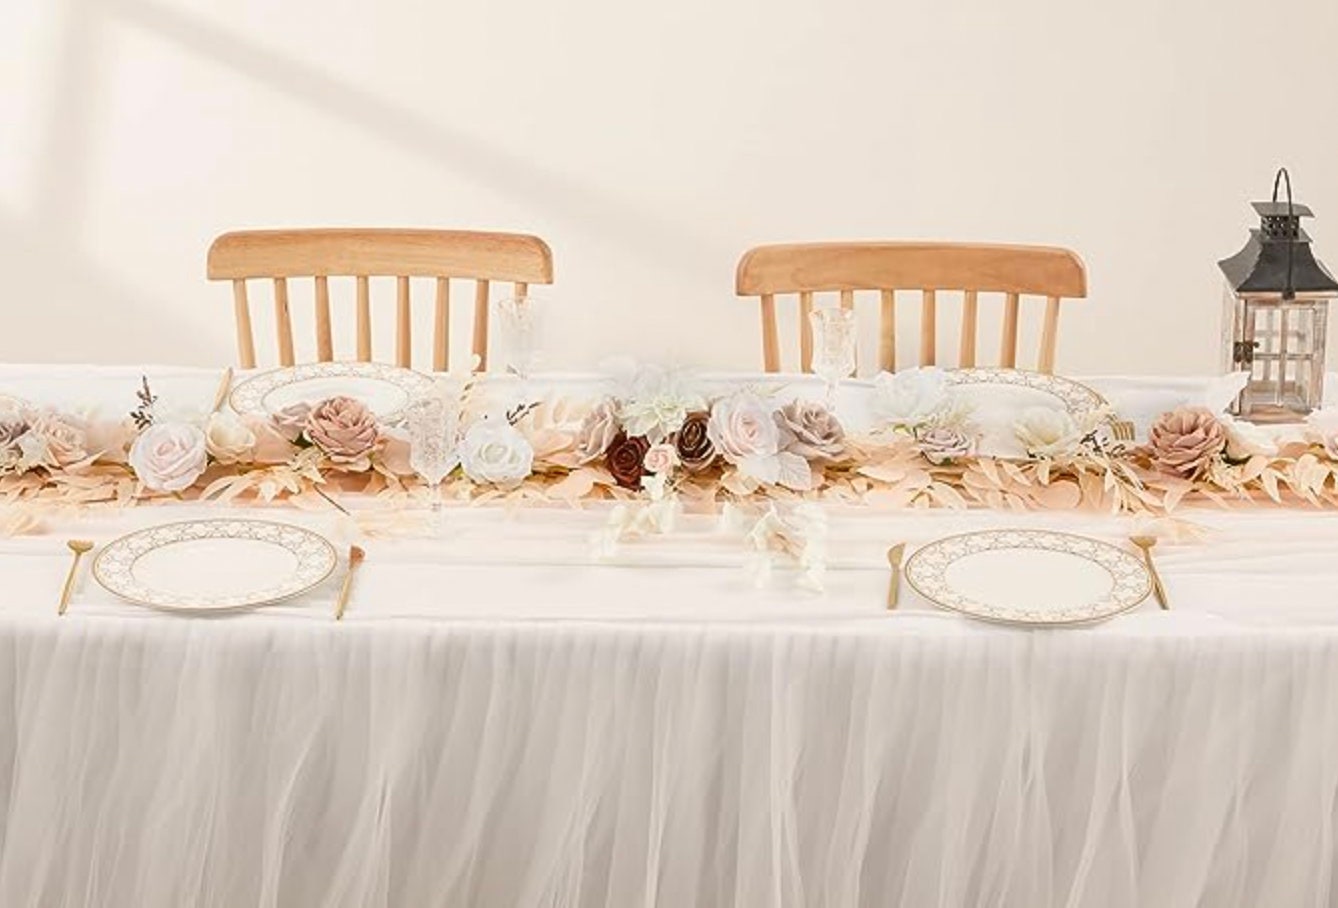 6 FT. Beige Floral Eucalyptus Garland Table Runner with Flowers Handcrafted Wedding Centerpieces for Rehearsal Dinner Bridal Shower | Beige